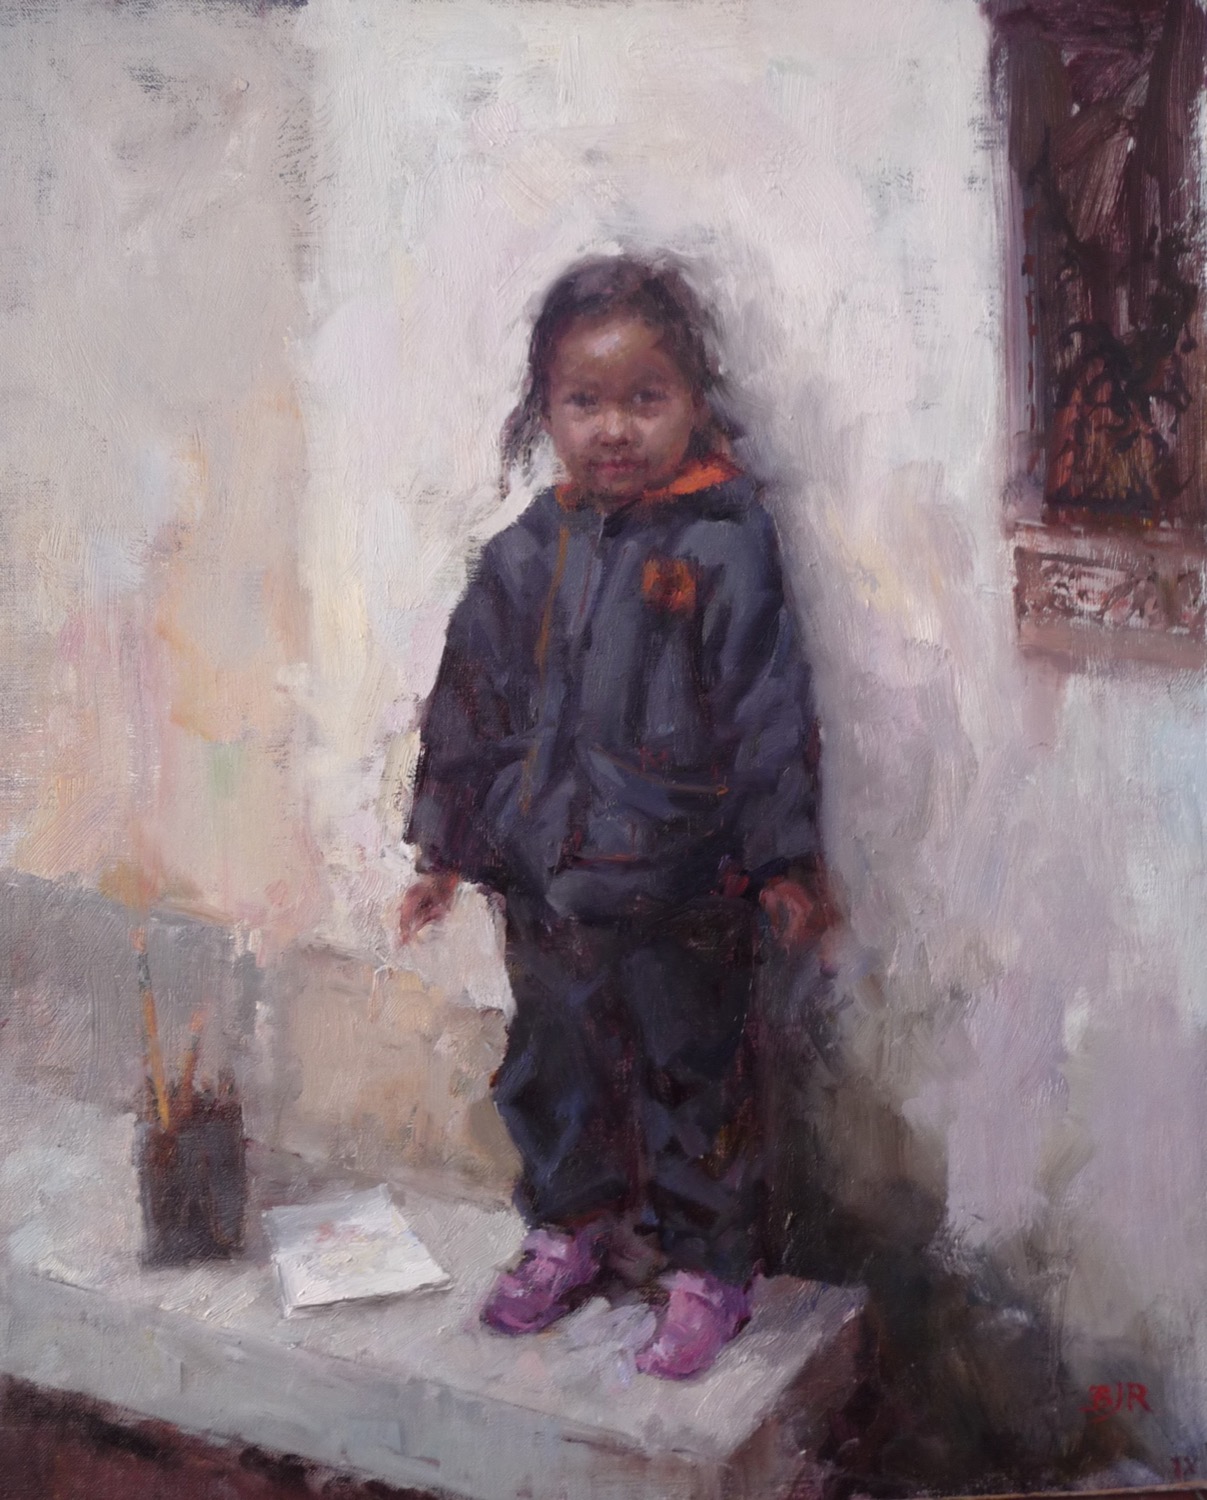 Zoucheng Girl, by Barry John Raybould, 20in x 16in, Oil on Linen, 2010